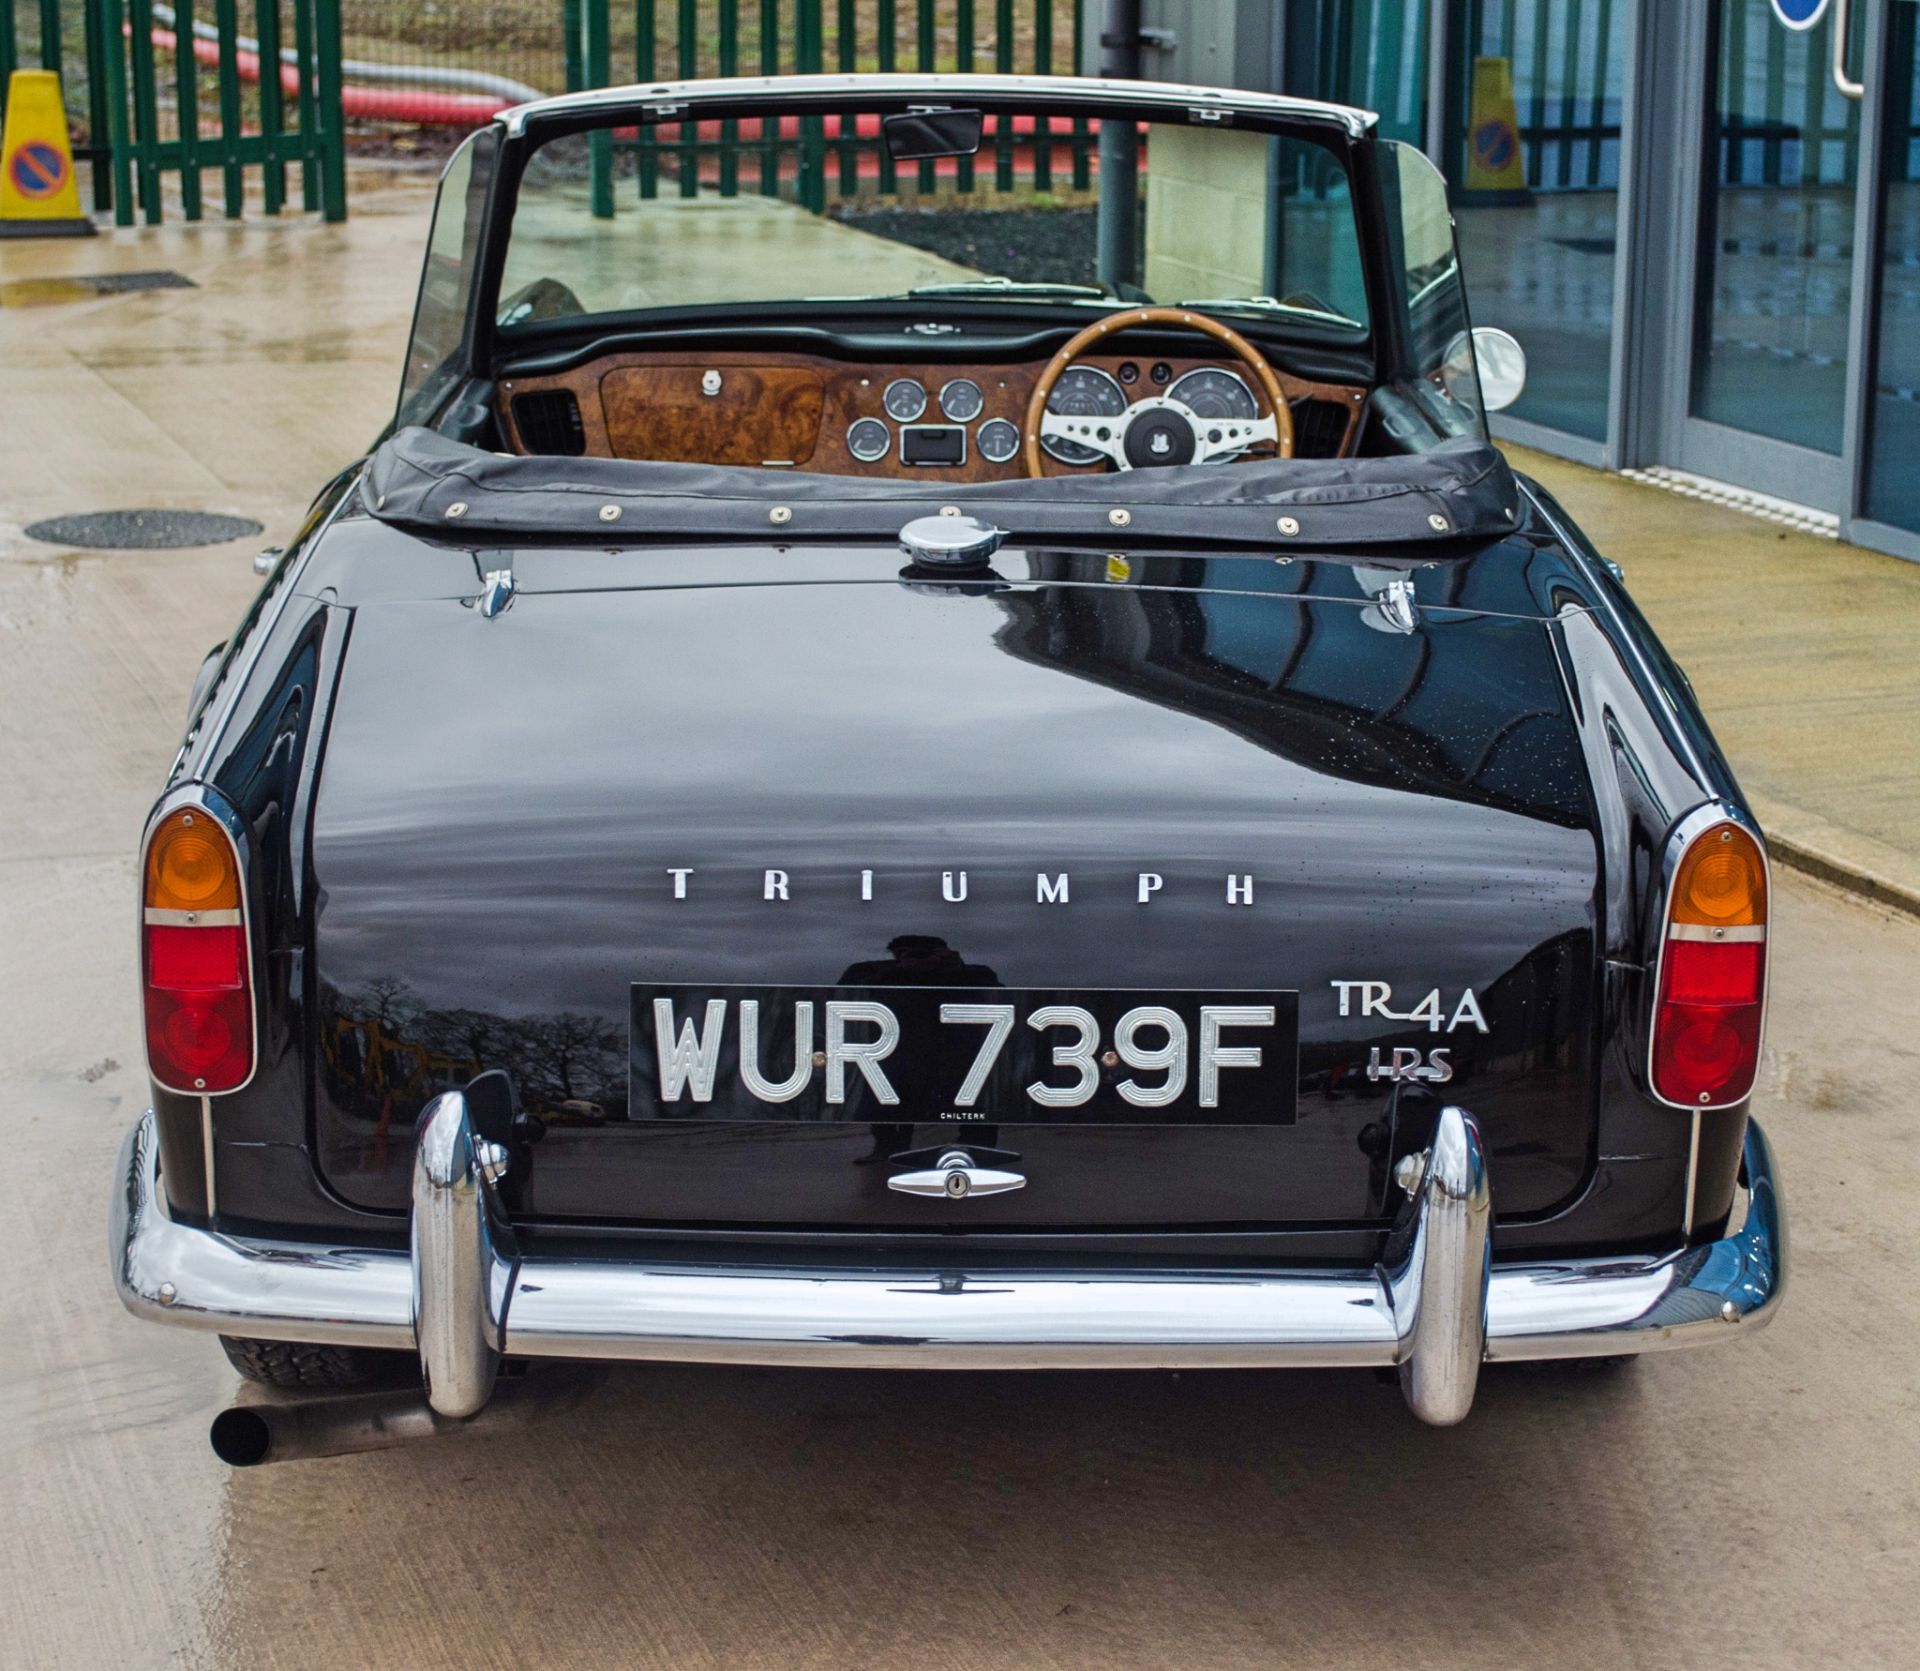 1967 Triumph TR4A IRS 2135cc convertible - Image 12 of 56